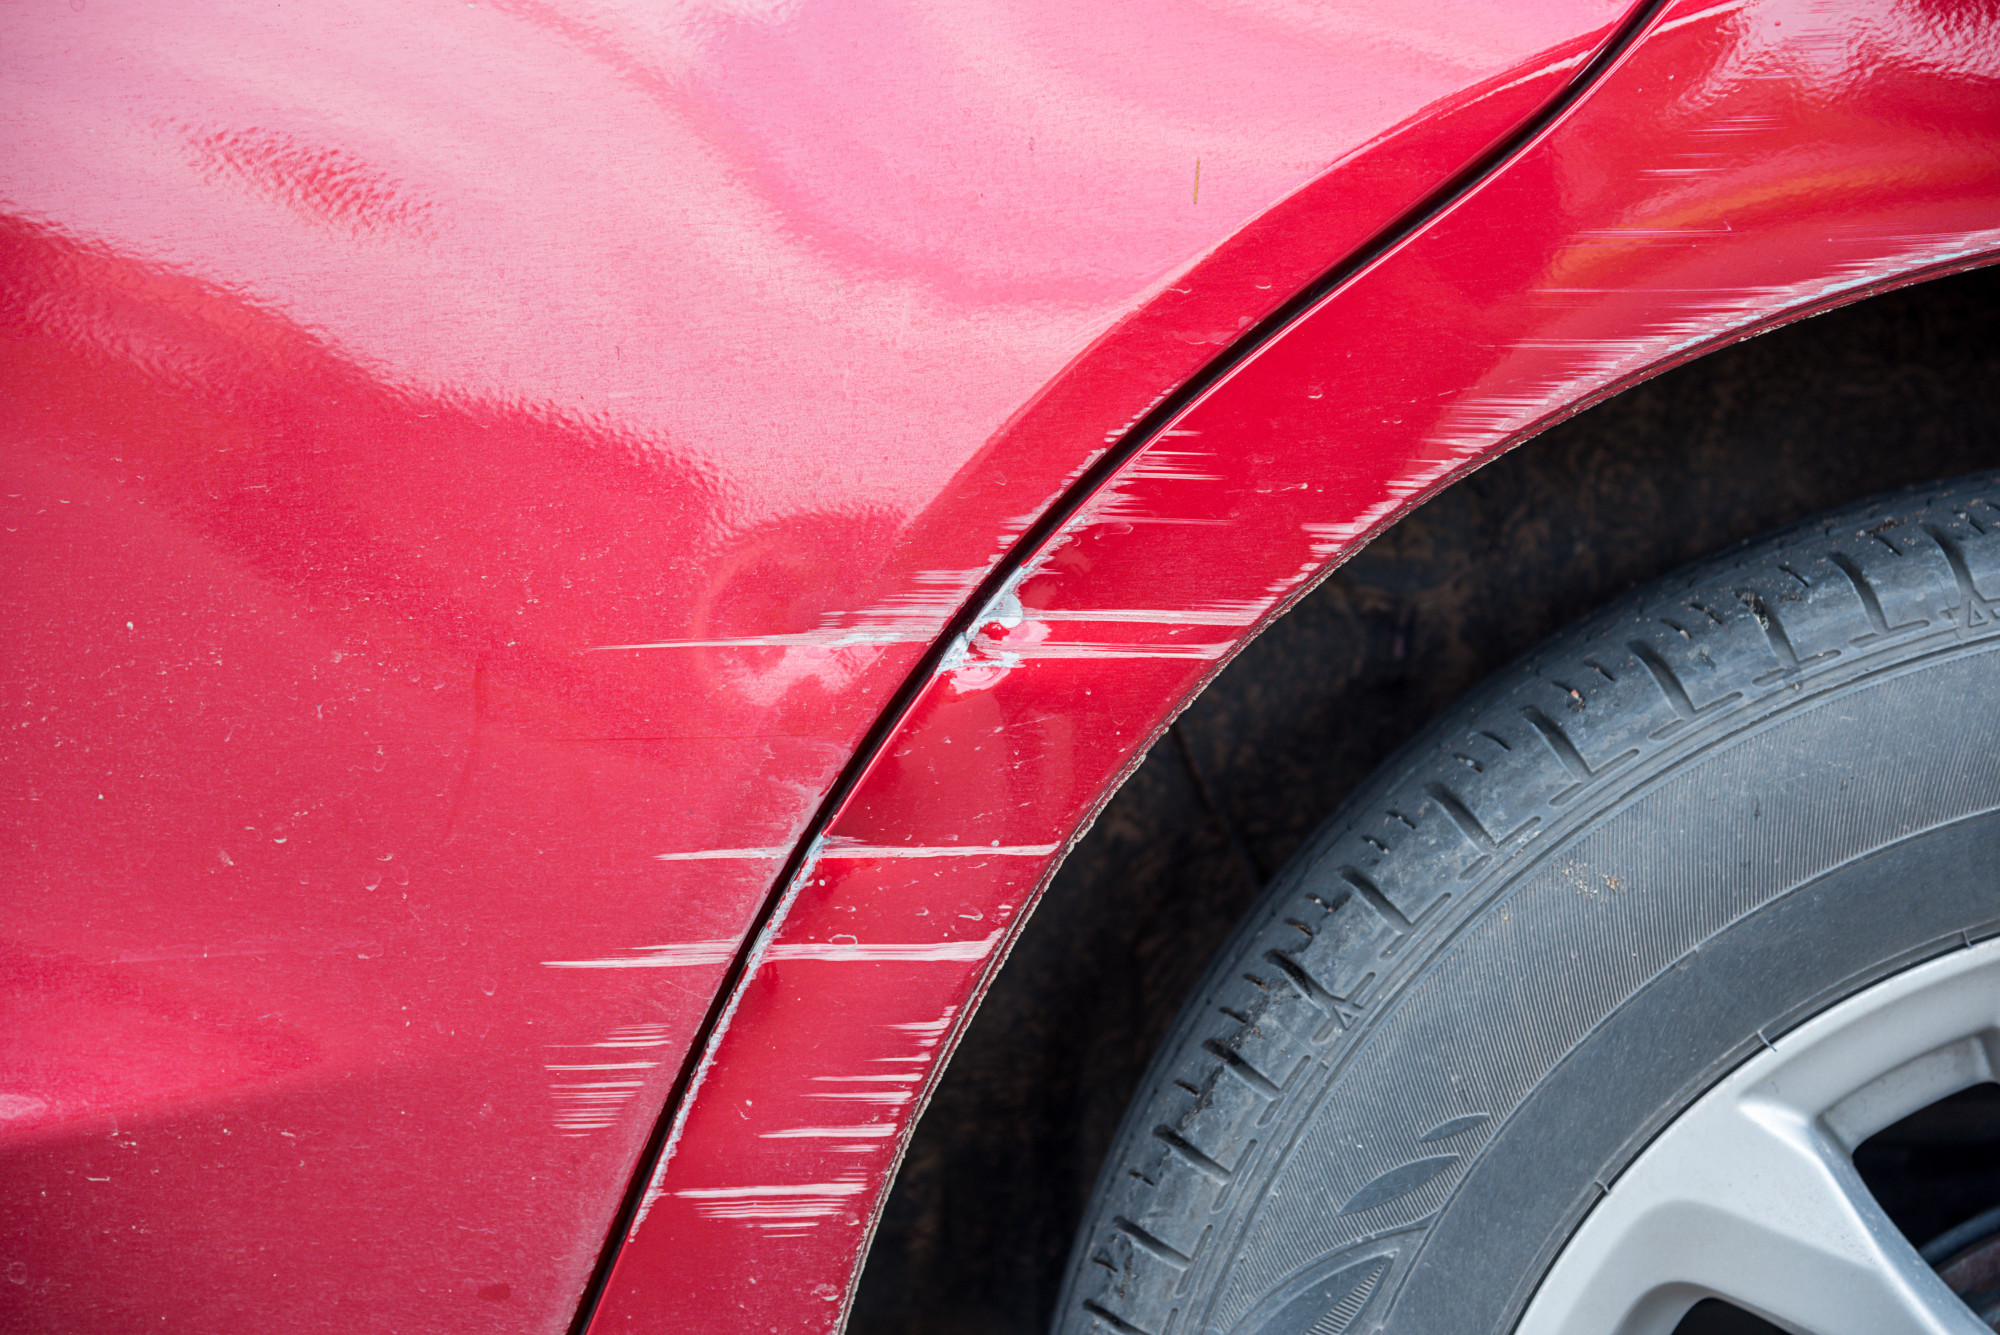 How to Repair Scratches on a Car